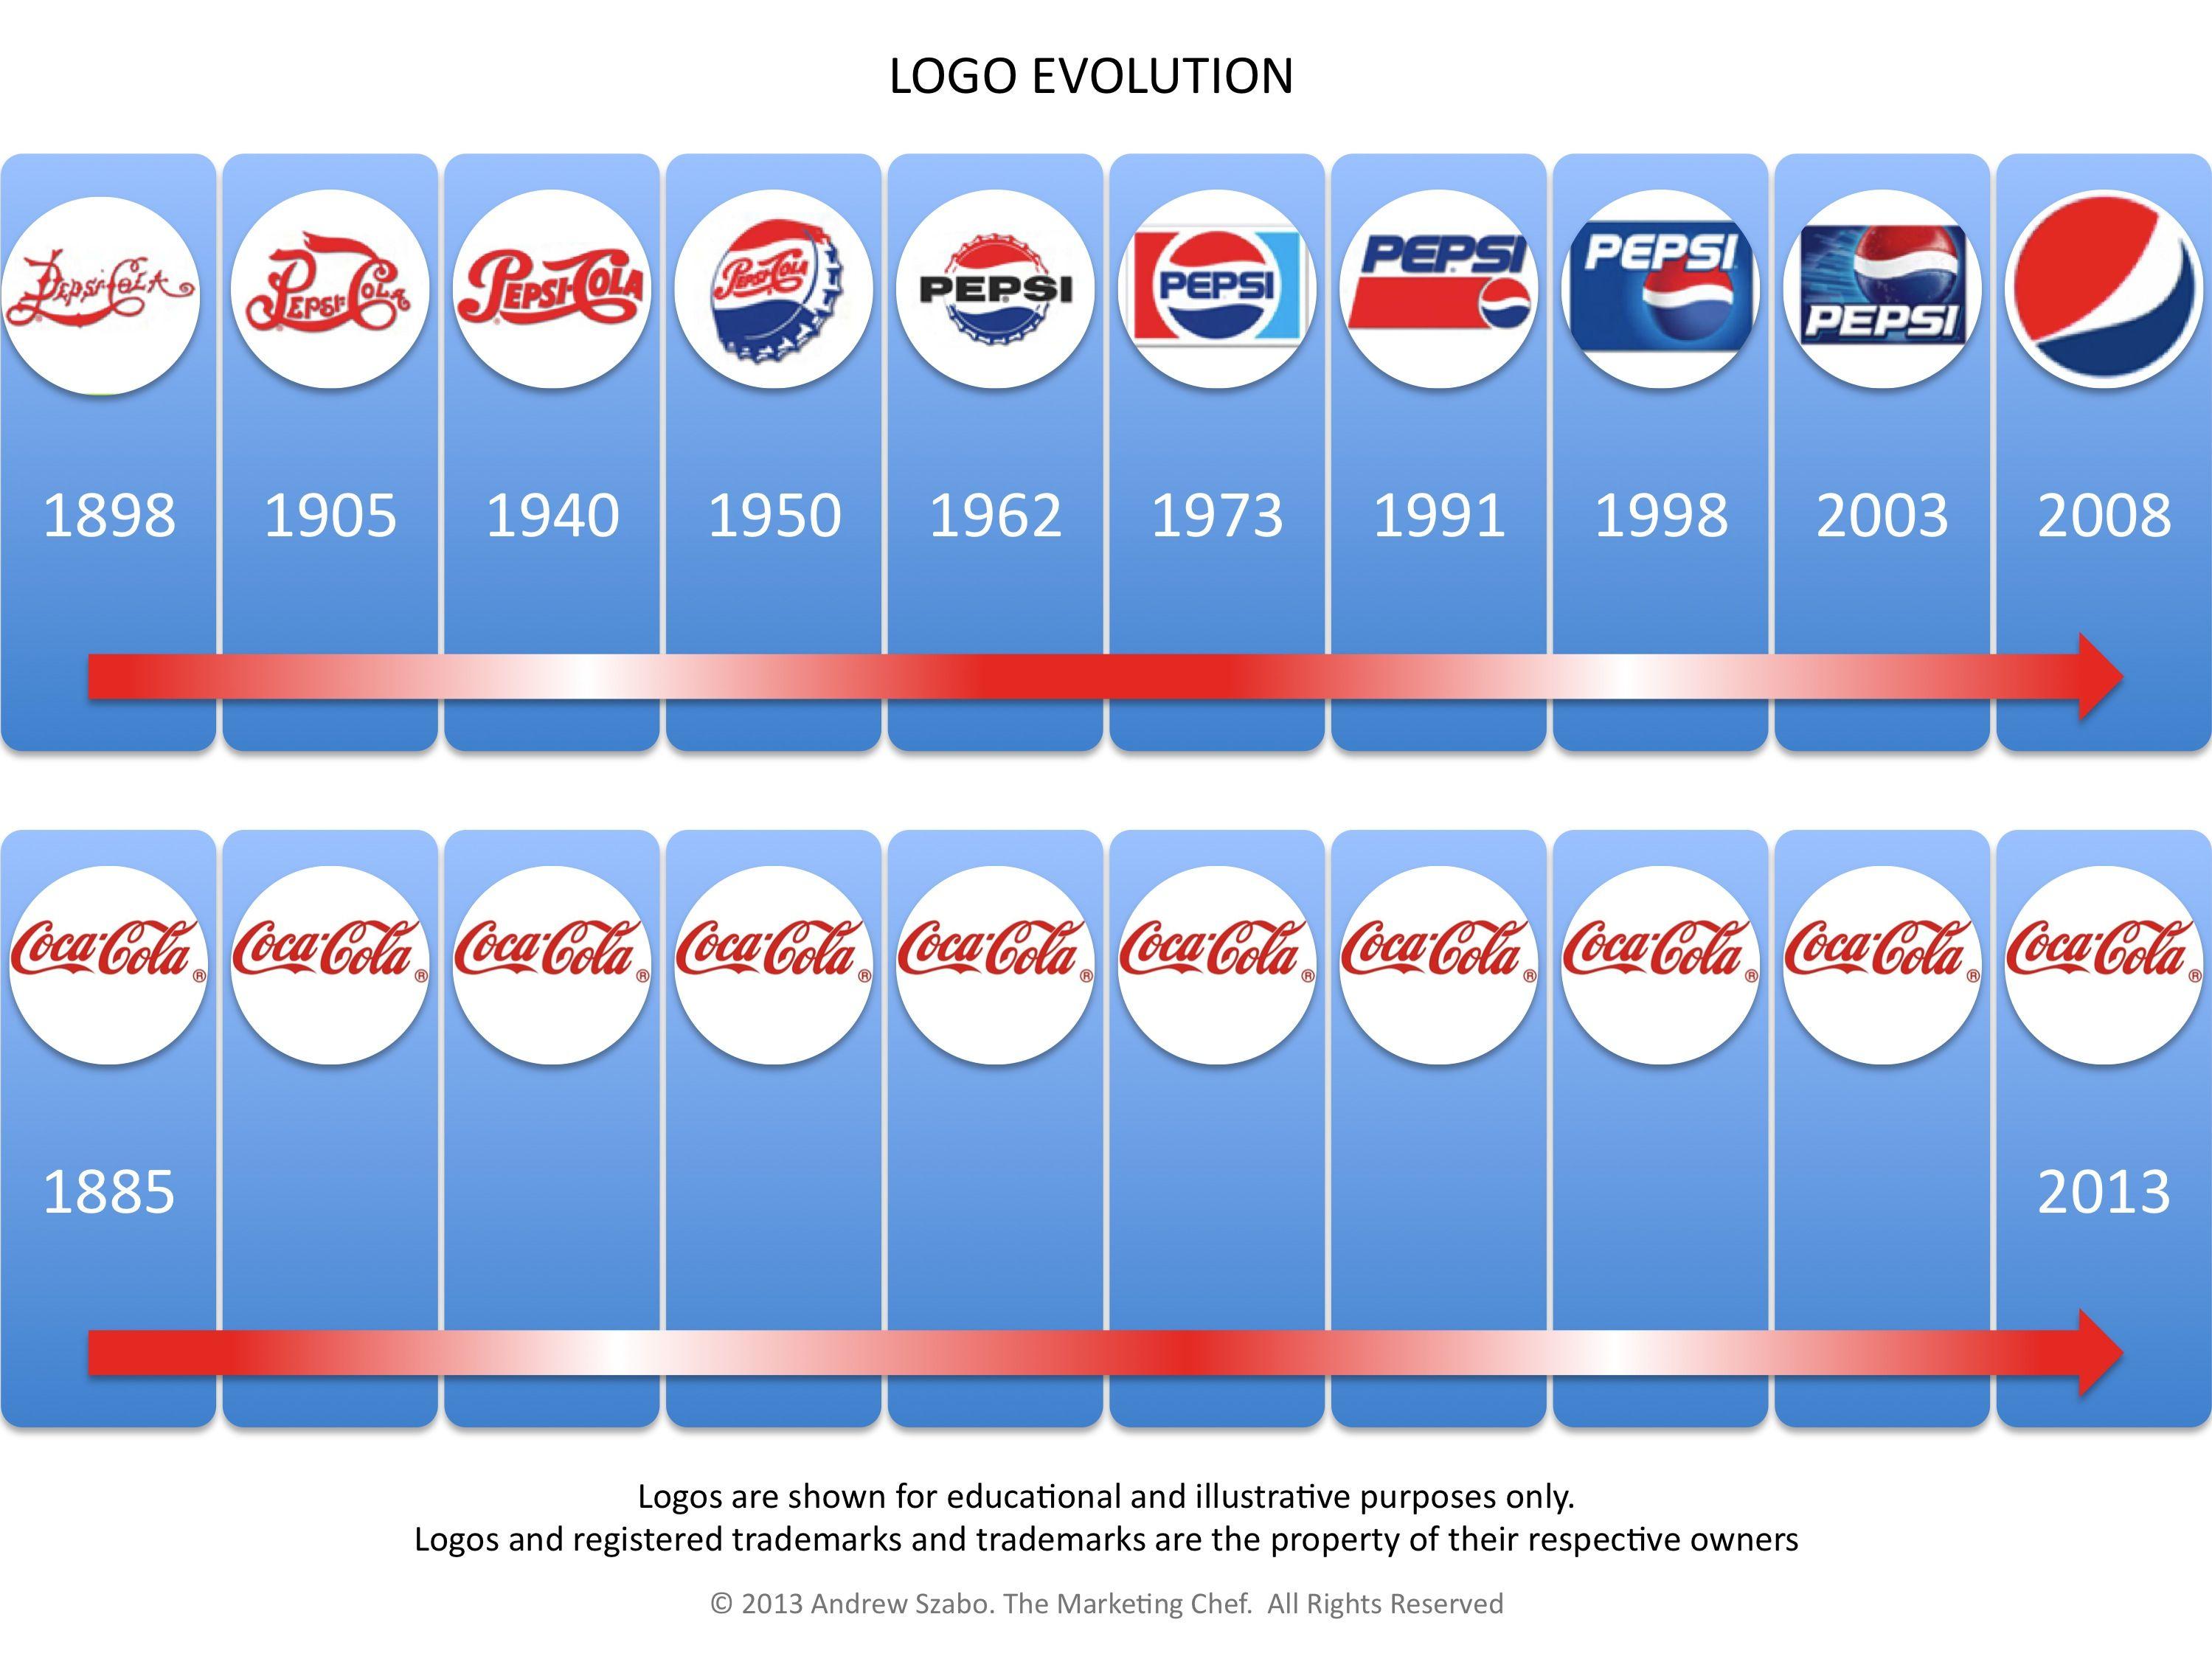 80s Pepsi Logo - Some famous Logos Then and Now